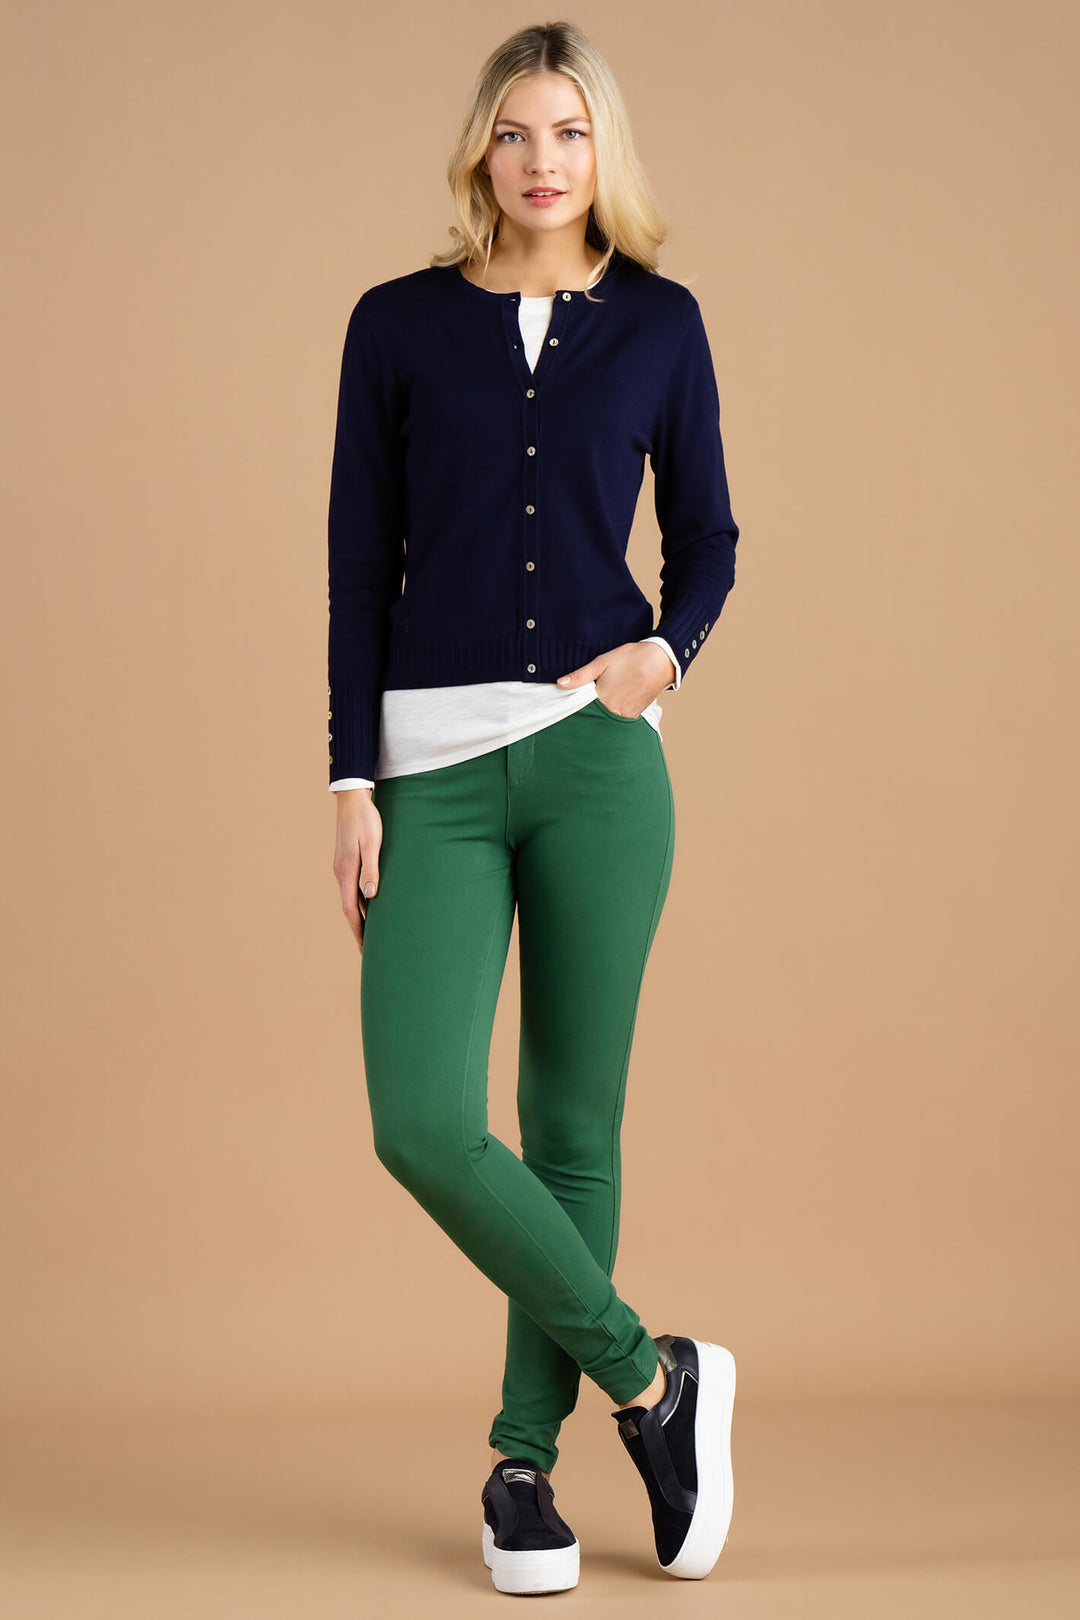 Marble Fashion 6309 103 Navy Button Front Cardigan